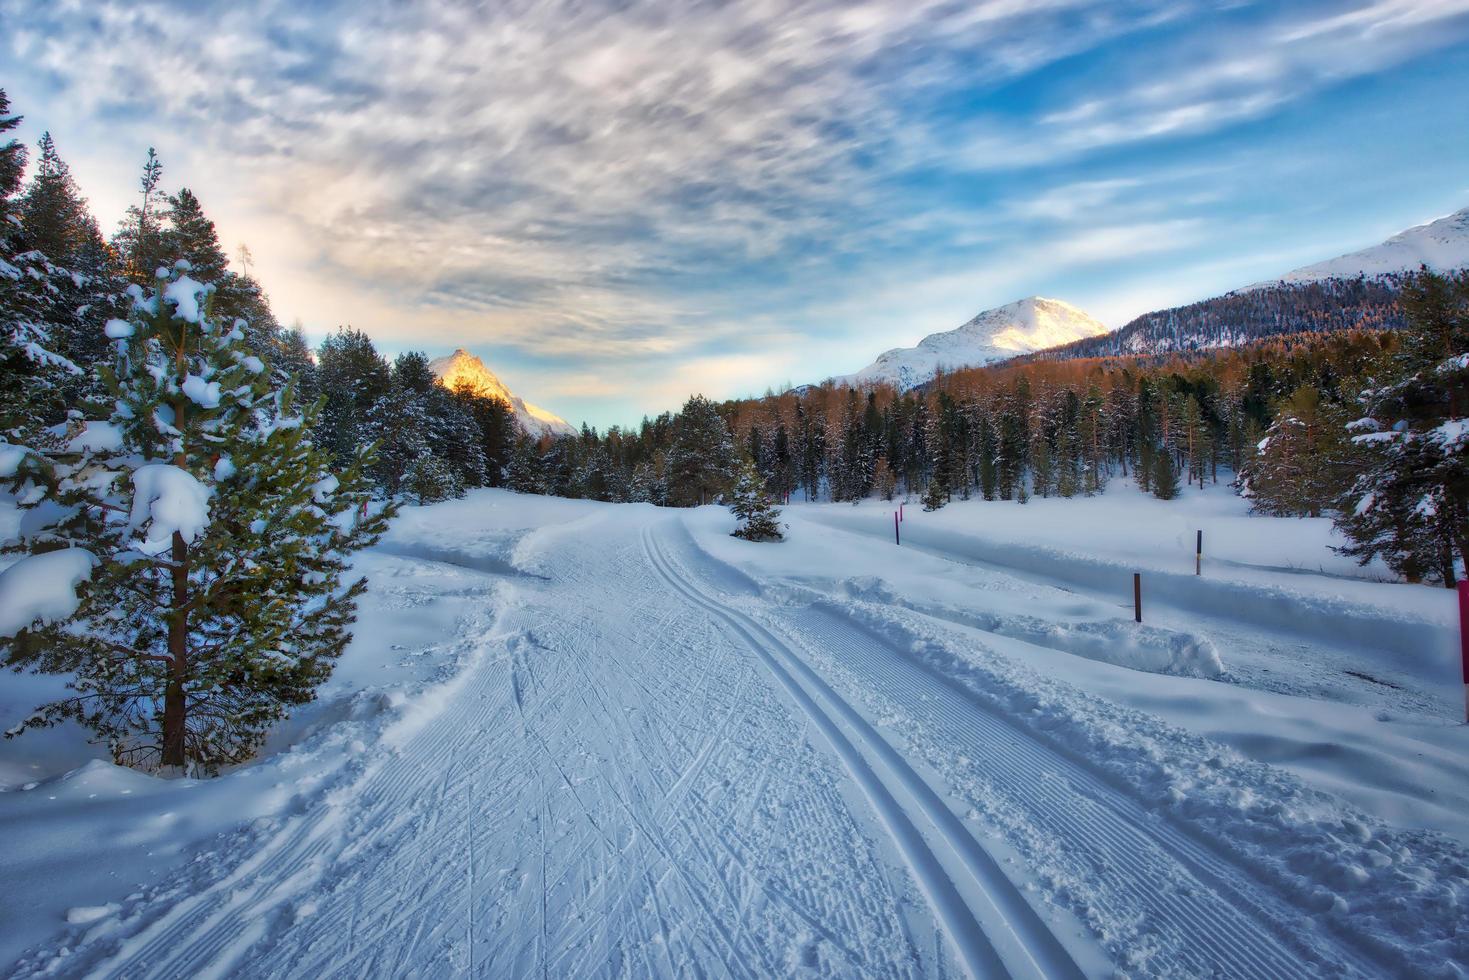 Cross-country skiing in a wonderful place photo